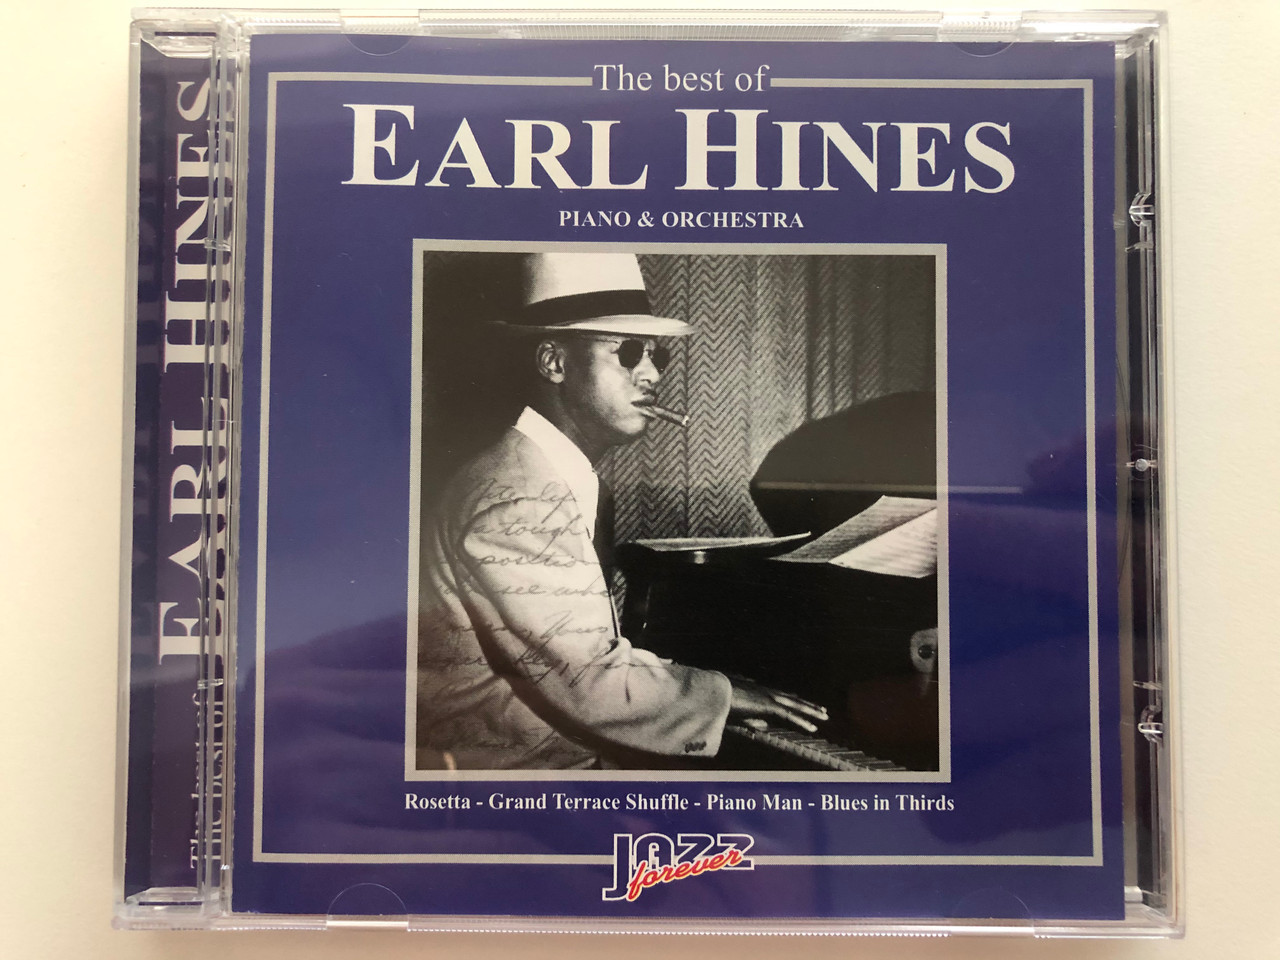 https://cdn10.bigcommerce.com/s-62bdpkt7pb/products/28774/images/171650/The_Best_Of_Earl_Hines_-_Piano_Orchestra_Rosetta_Grand_Terrace_Shuffle_Piano_Man_Blues_in_Thirds_Jazz_Forever_Audio_CD_2000_CD_67023_1__32023.1616000310.1280.1280.JPG?c=2&_ga=2.203924816.154268922.1617891306-1247300196.1617891306